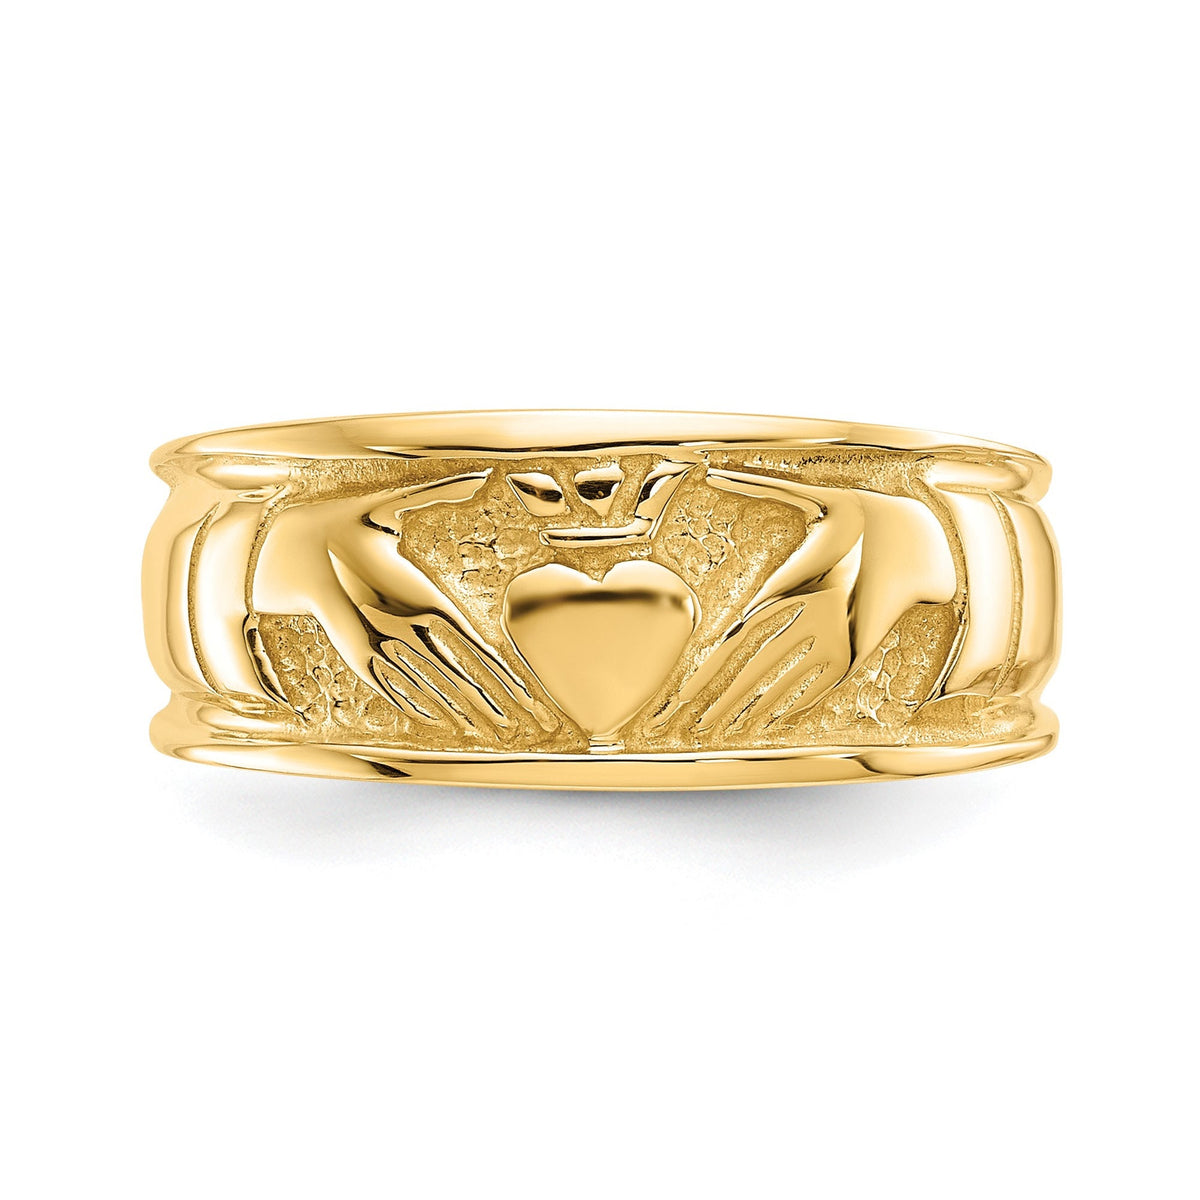 Womens Claddagh Ring Celtic Band available in 14k Yellow Gold & 10k Yellow Gold -Gift Box Included - Made in USA